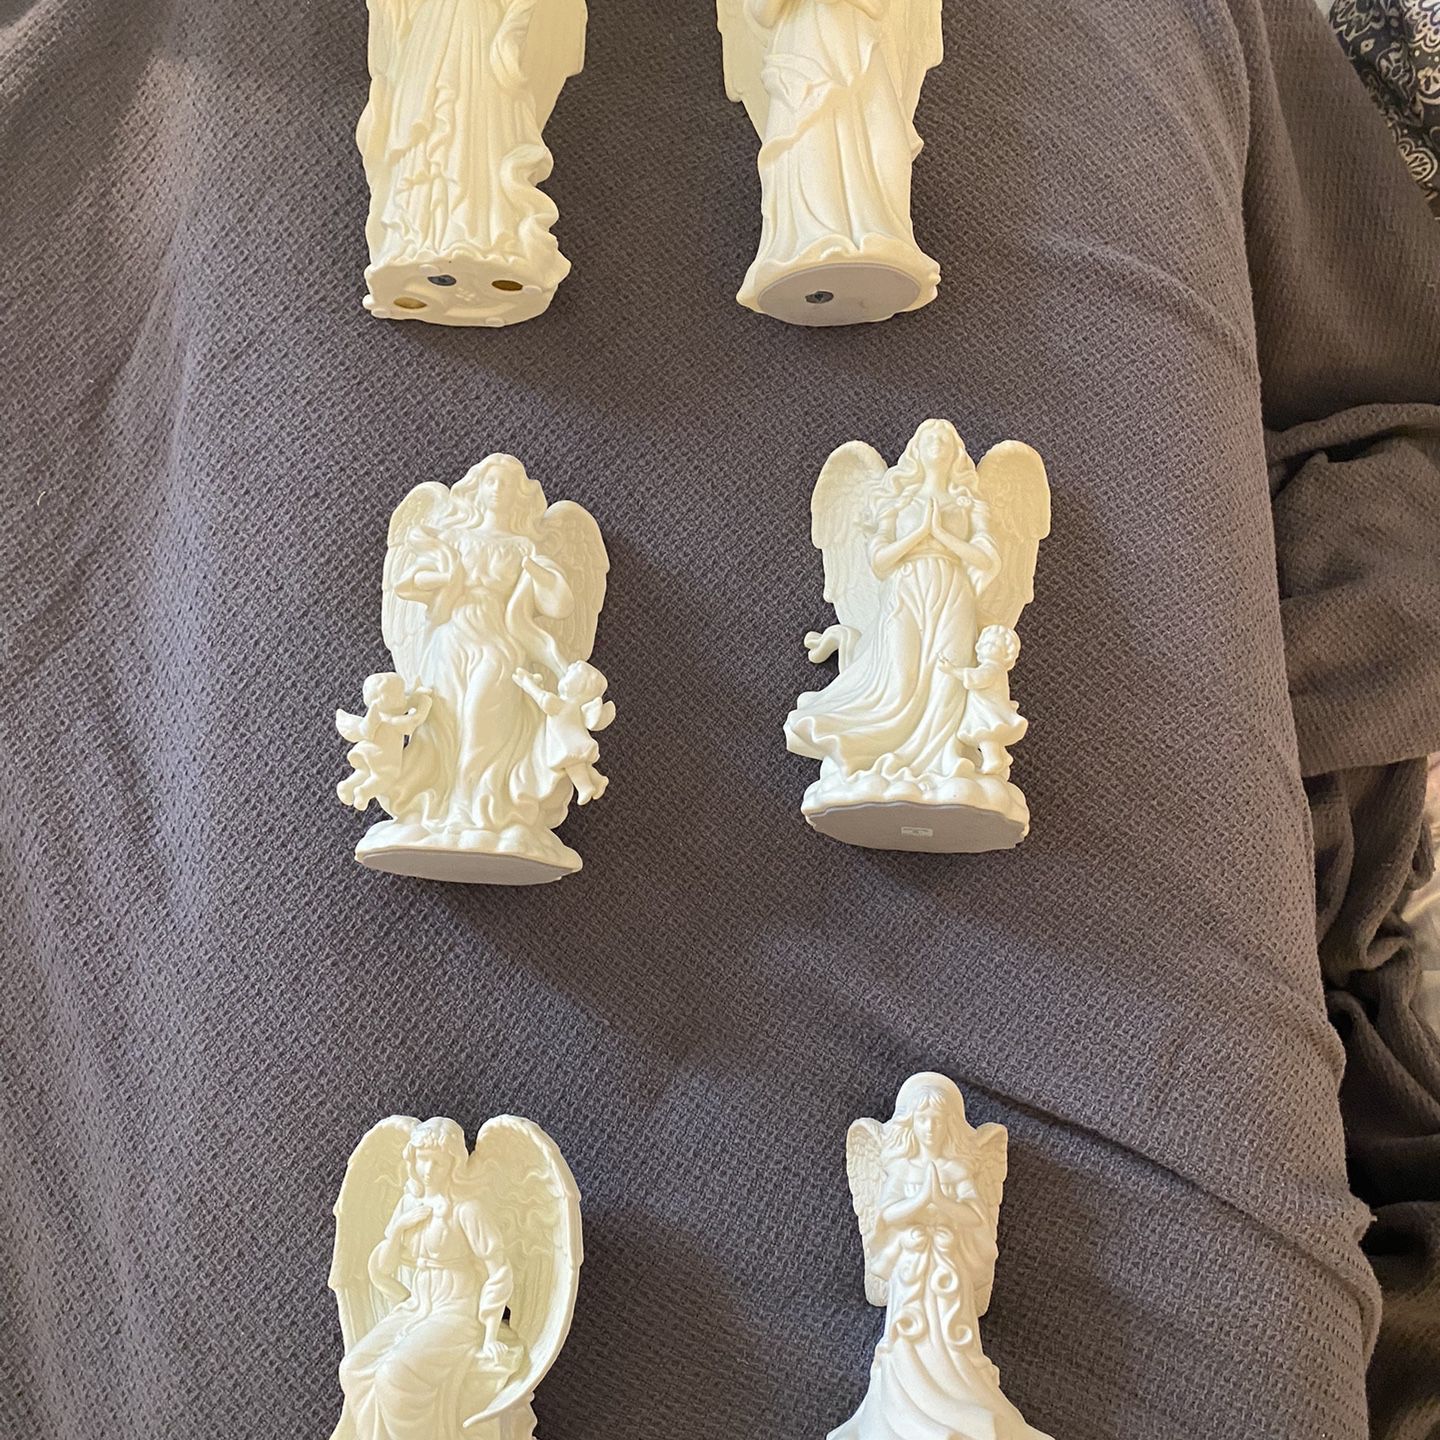 Angel figurines candle holders (6)